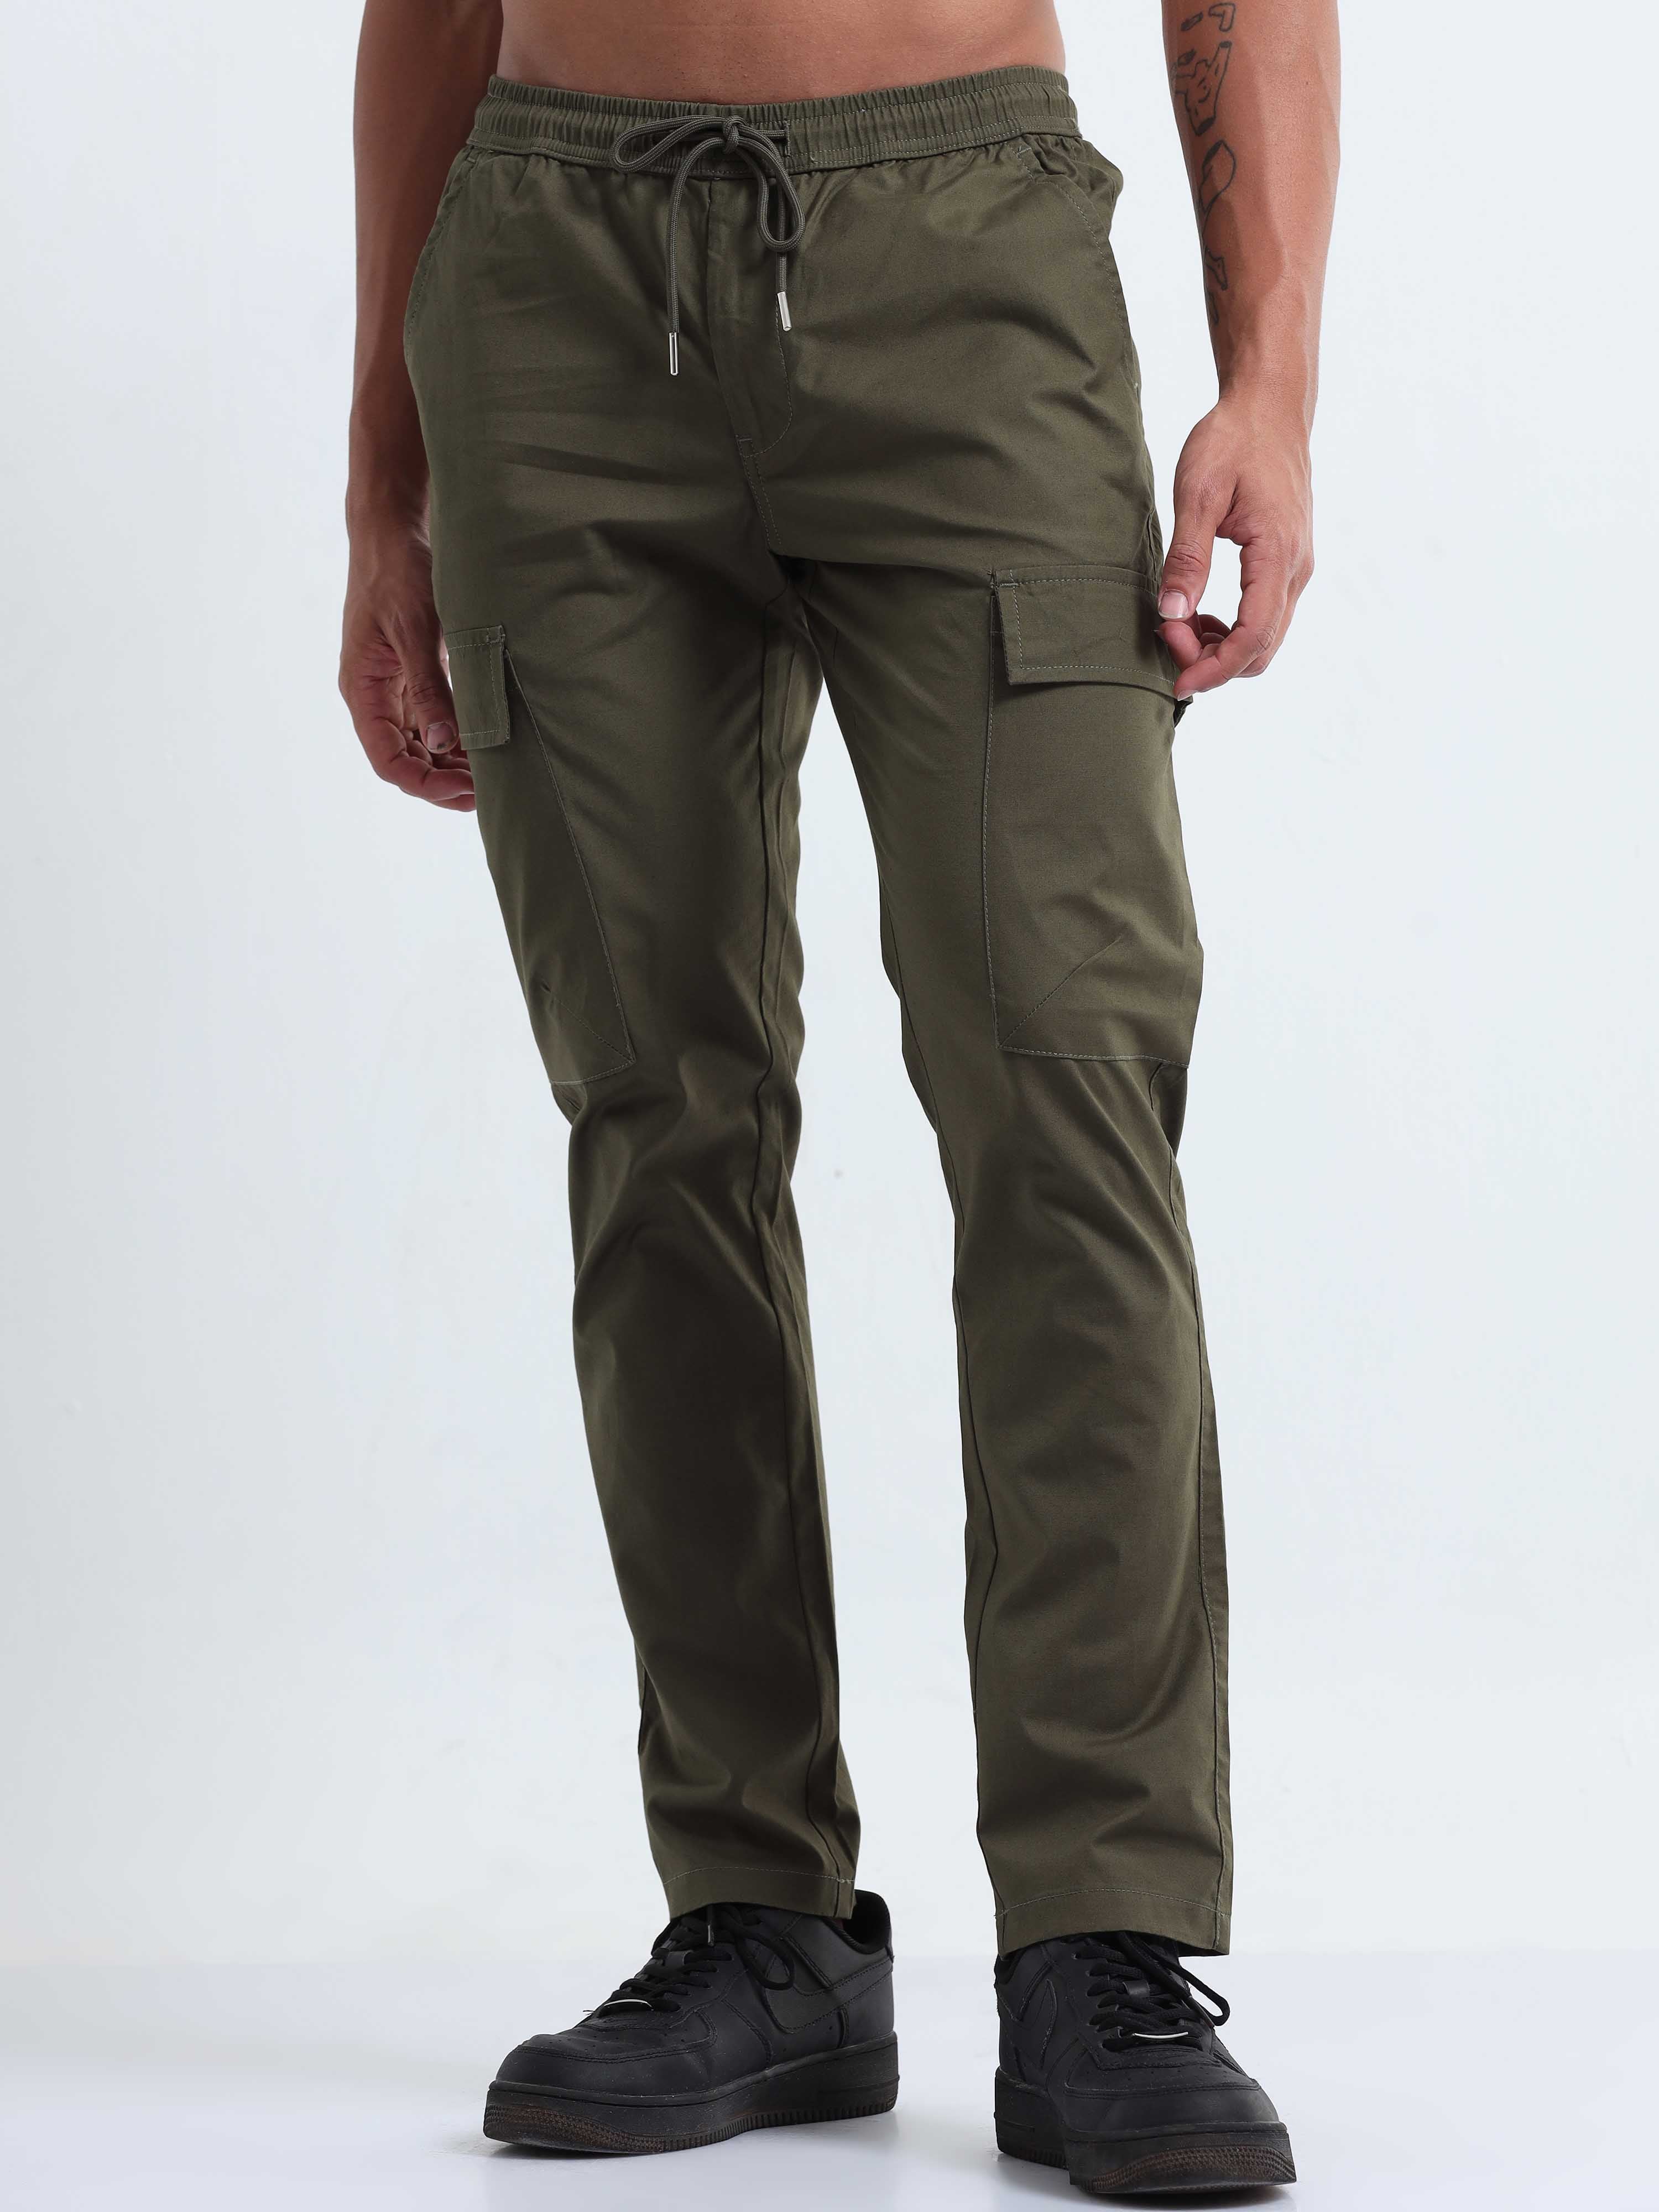 Buy Olive Green Trousers & Pants for Men by MUFTI Online | Ajio.com